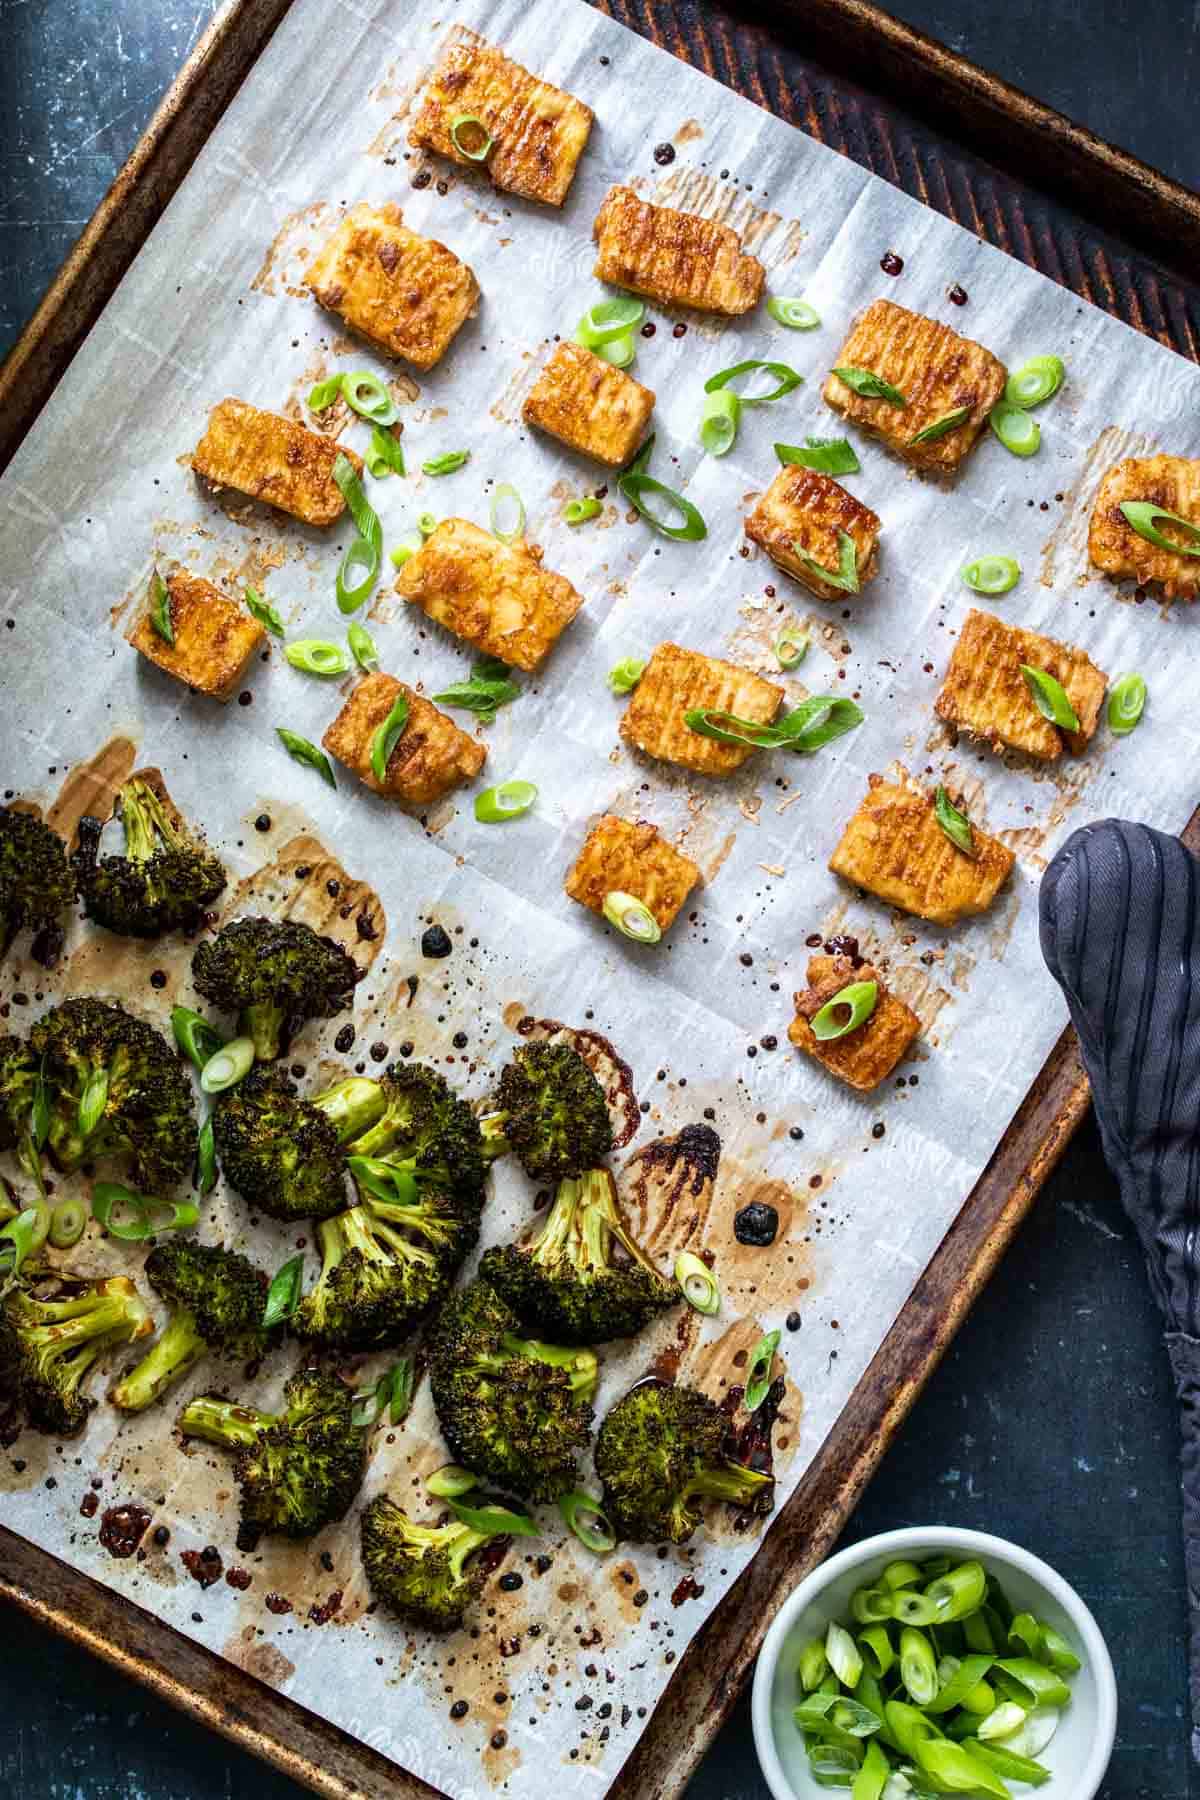 A baking sheet lined with parchment paper with baked tofu pieces and broccoli on it sprinkled with green onions